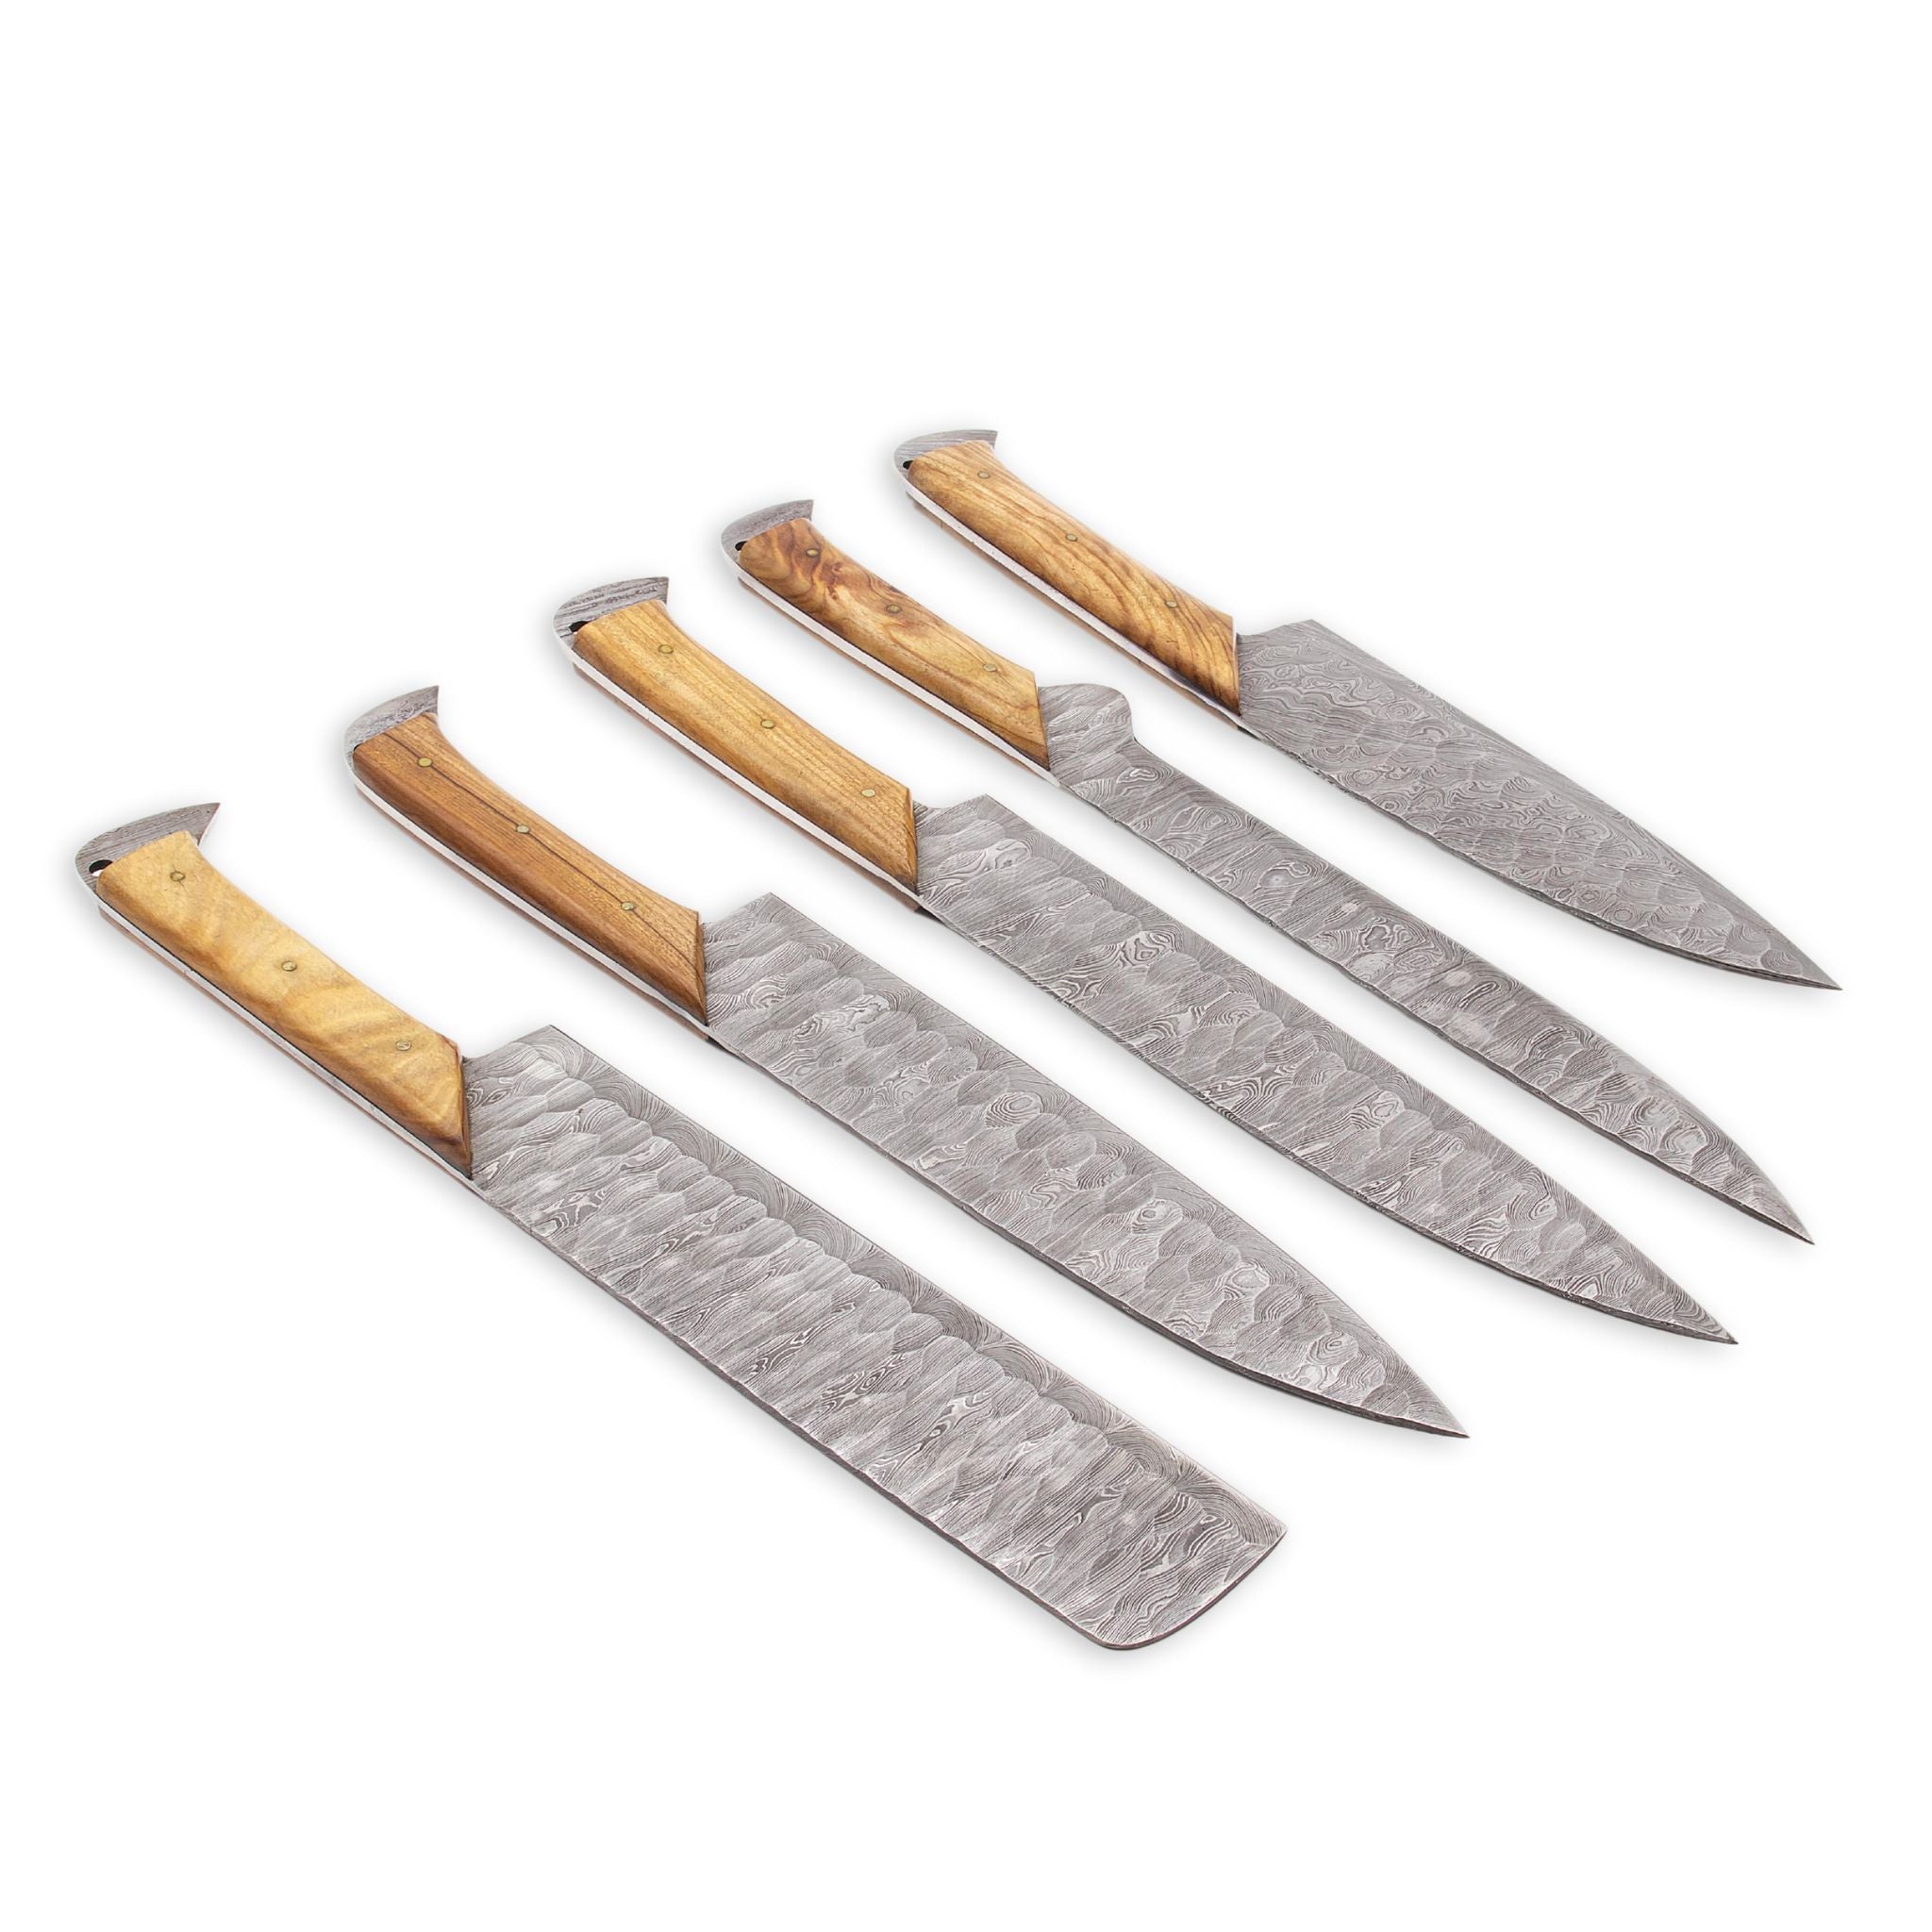 Chef Knife Set I, Damascus Steel, Handmade, with Genuine Leather Roll